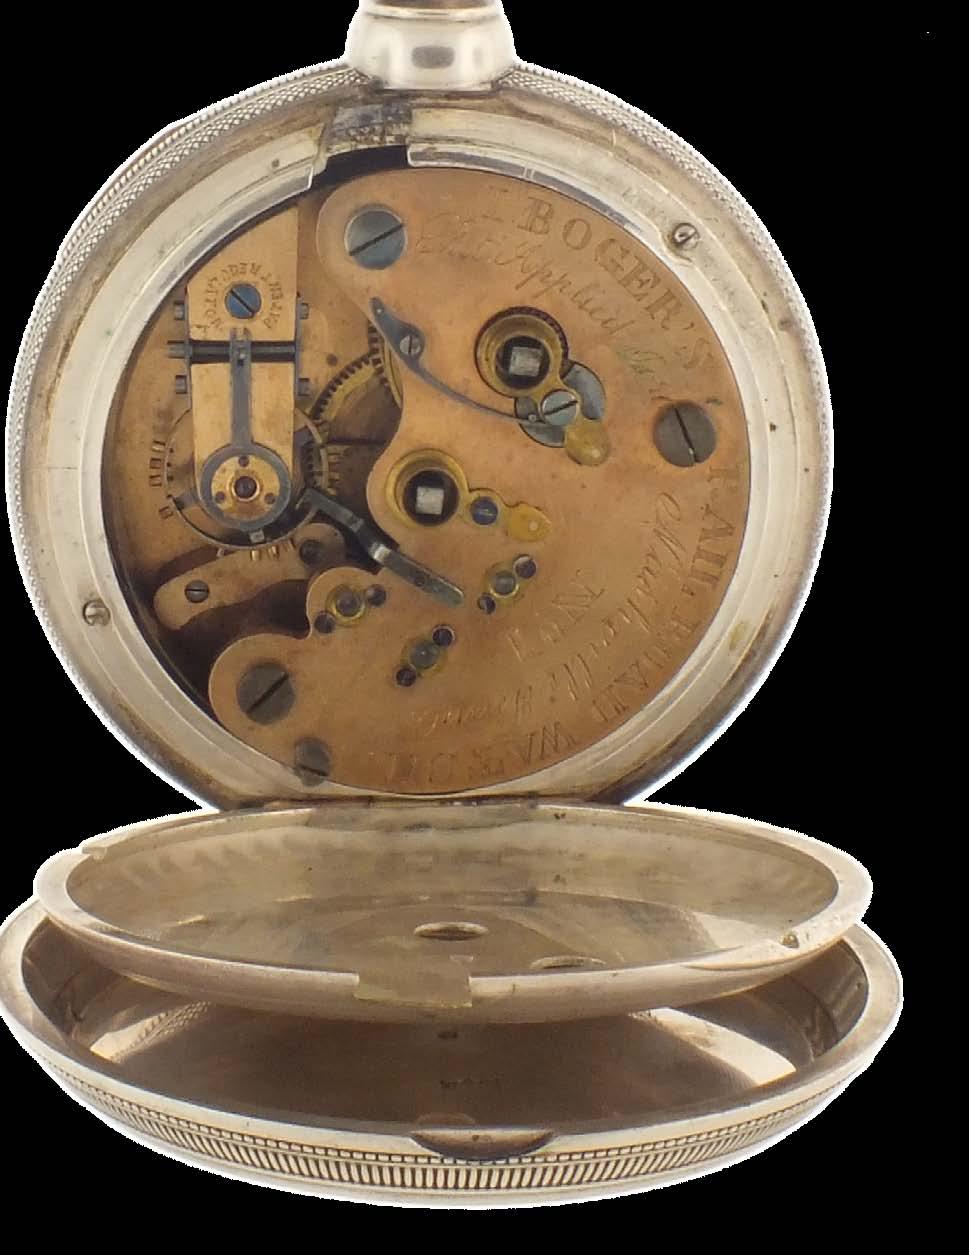 Auctioneer Daniel Horan, NH License #5060 Lot 1034 contents 1 Event Announcements 4 antiques & Early photography 12 Mechanical music 13 carriage & Desk Clocks 26 Chronometers, Deck watches & Nautical